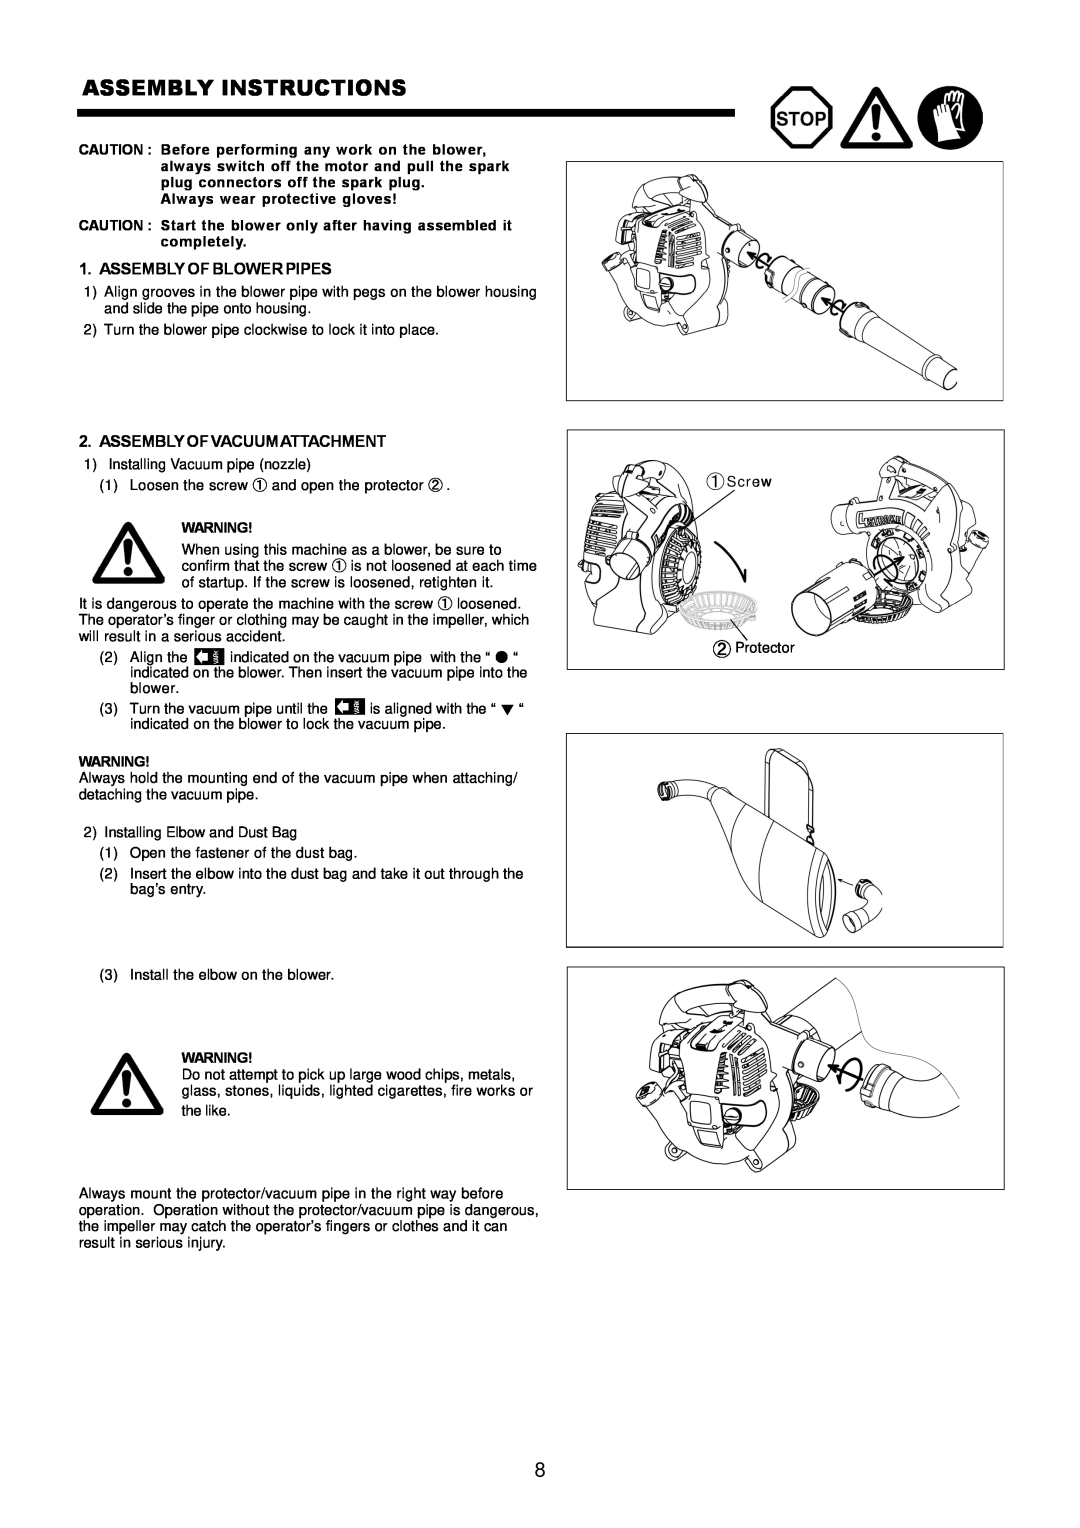 Makita BHX2500 Assembly Instructions, Assembly Of Blower Pipes, Assemblyof Vacuumattachment, Always wear protective gloves 